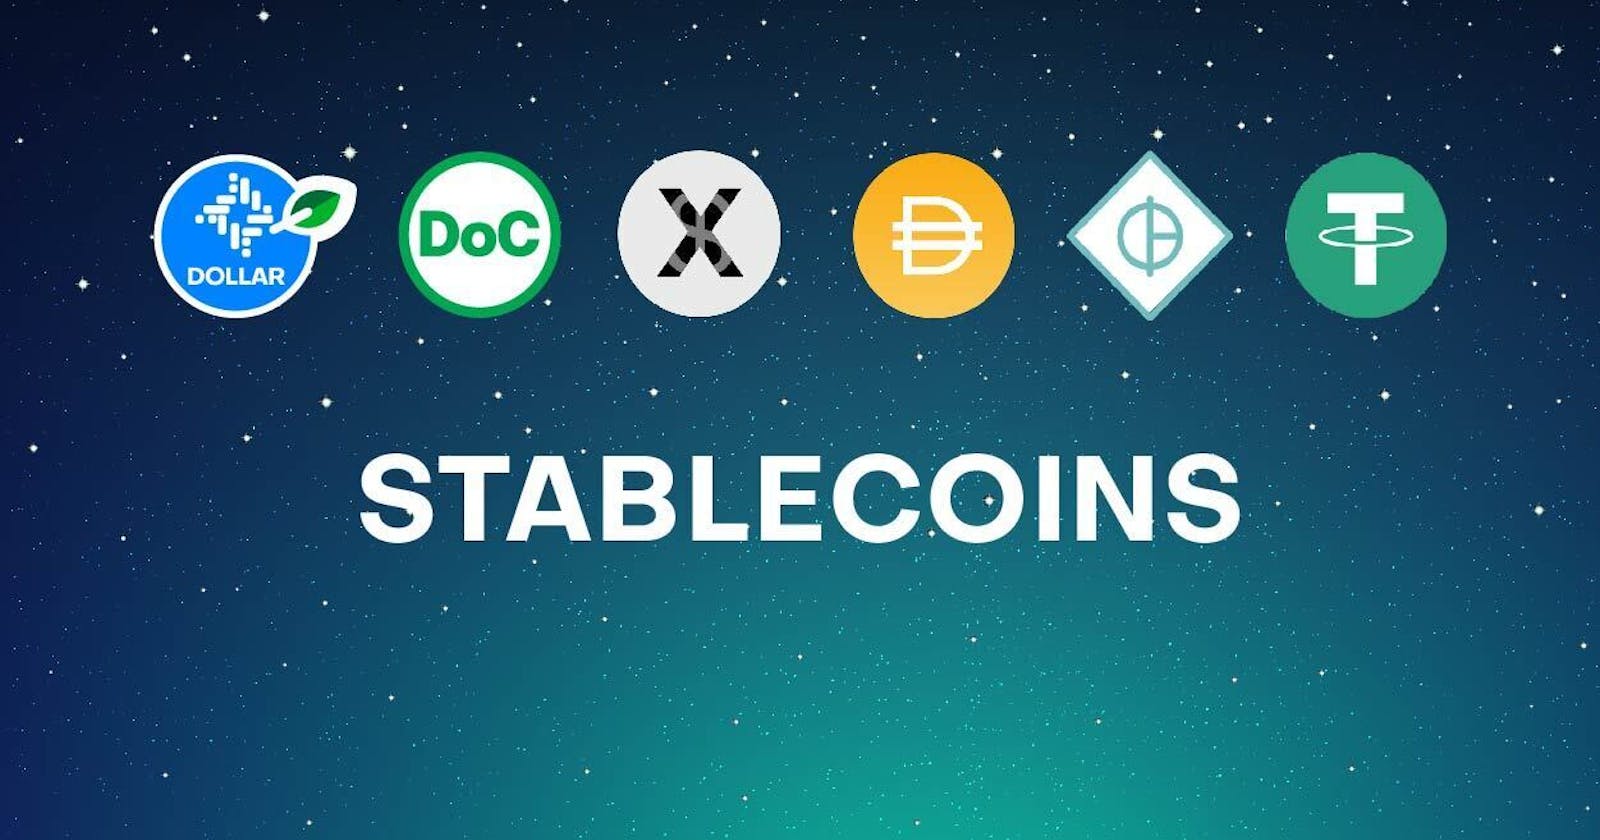 The Complete Guide to Stablecoins